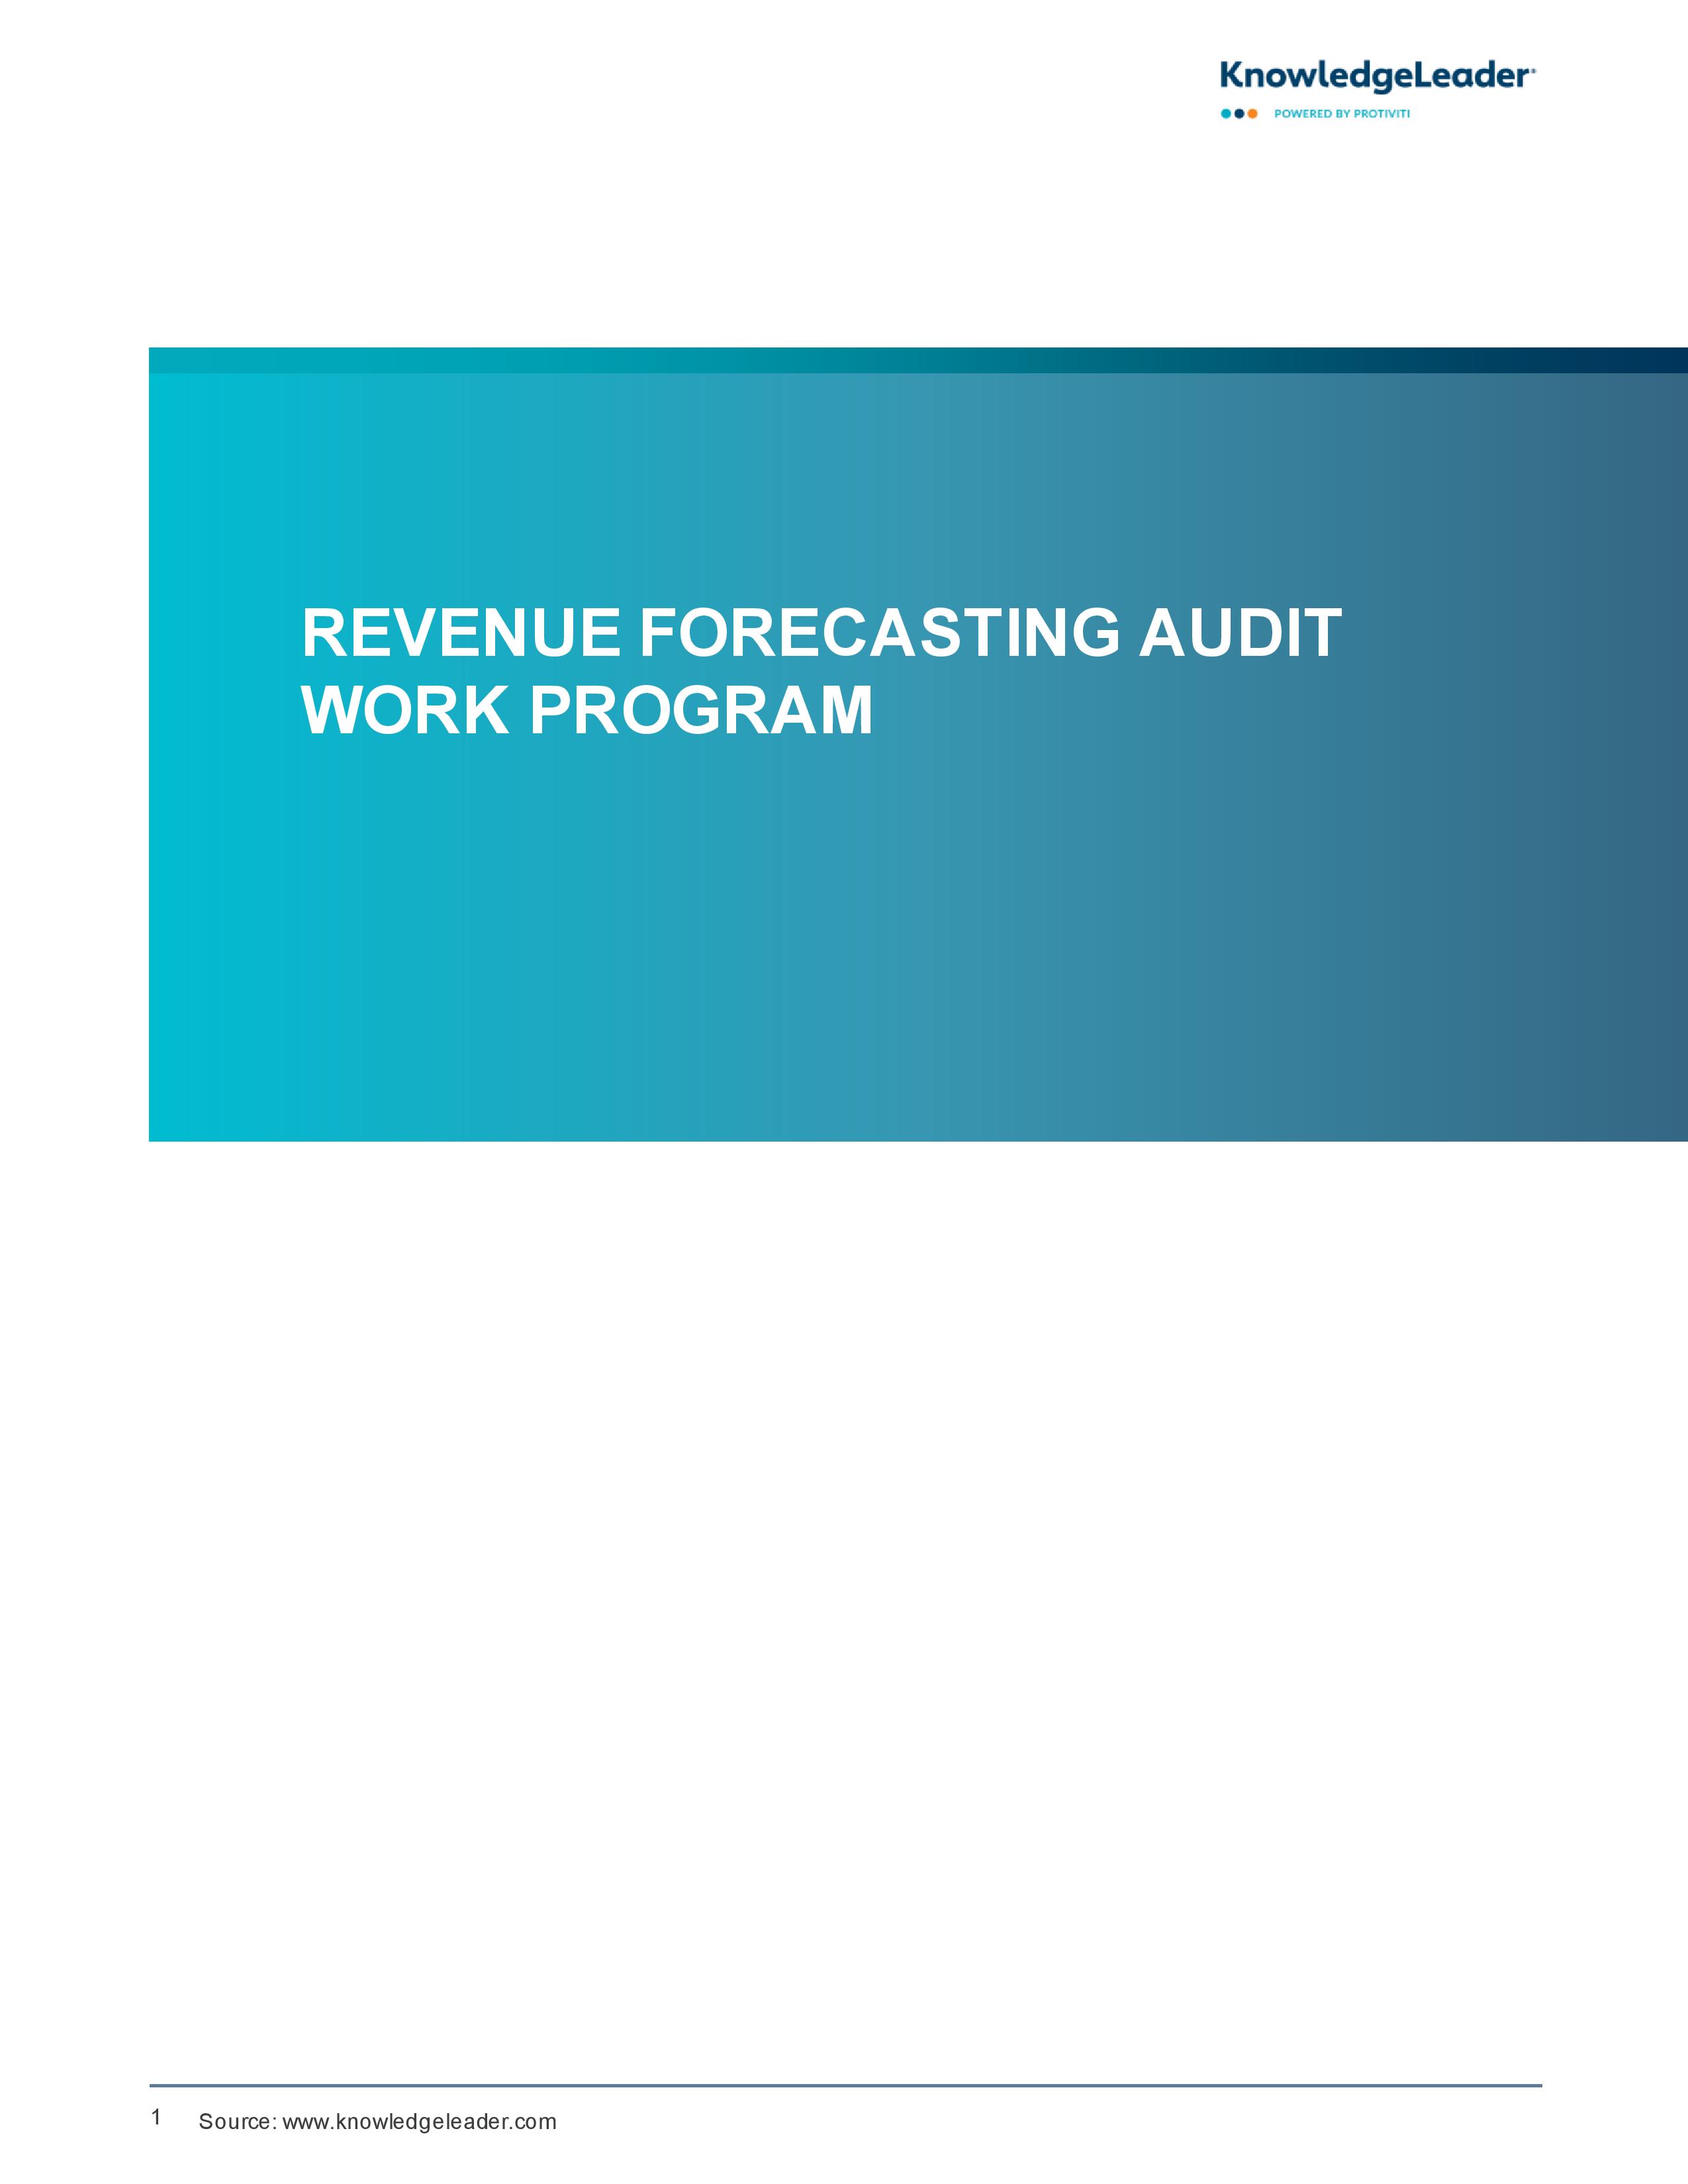 Screenshot of the first page of Revenue Forecasting Audit Work Program